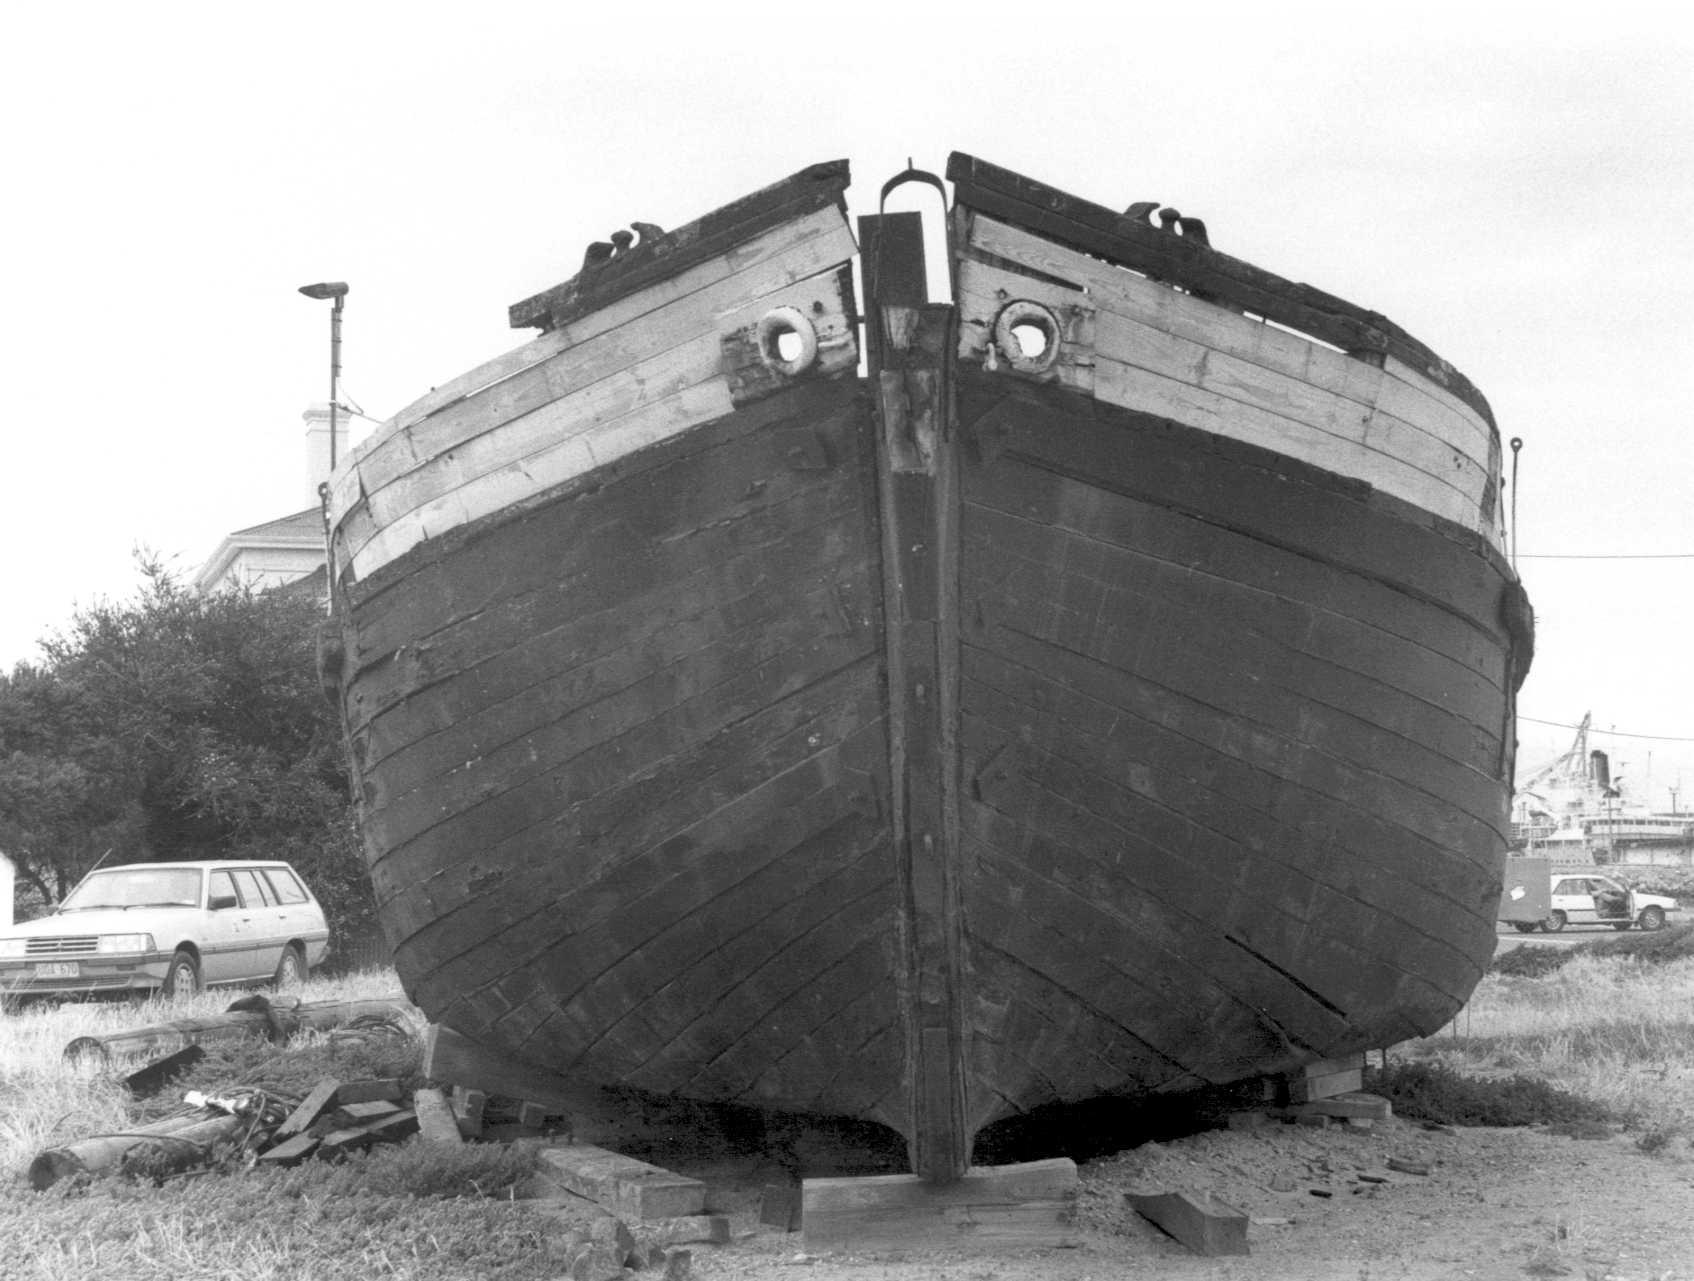 This image shows bow of vessel, on land, in a state of disrepair.